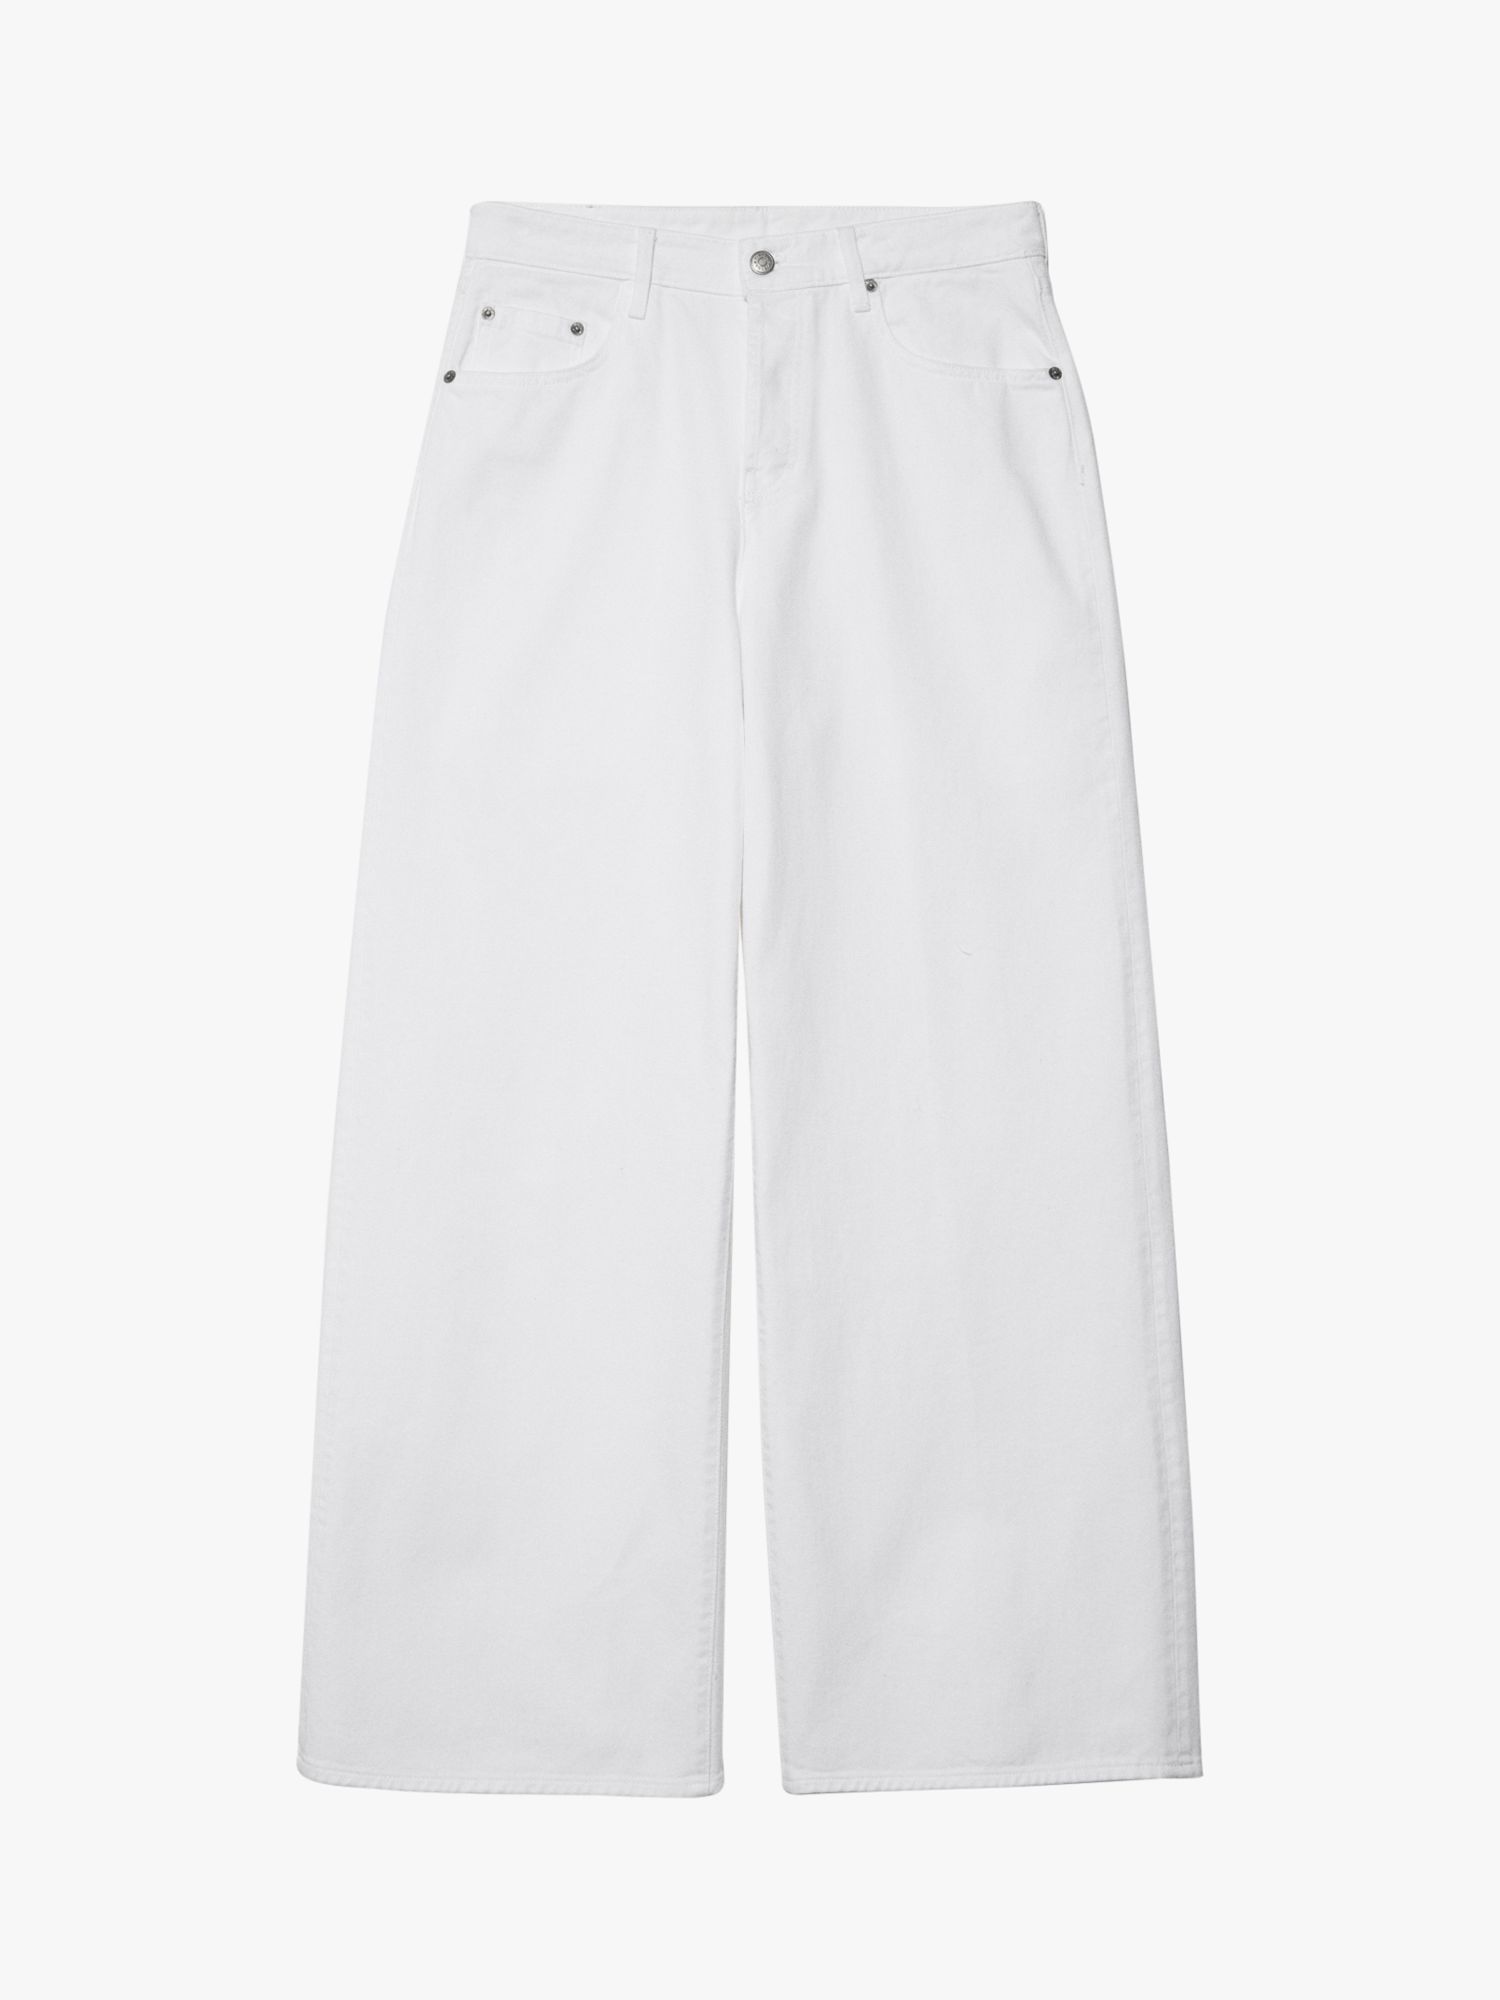 SISLEY Low Waist Wide Fit Jeans, White, 27R